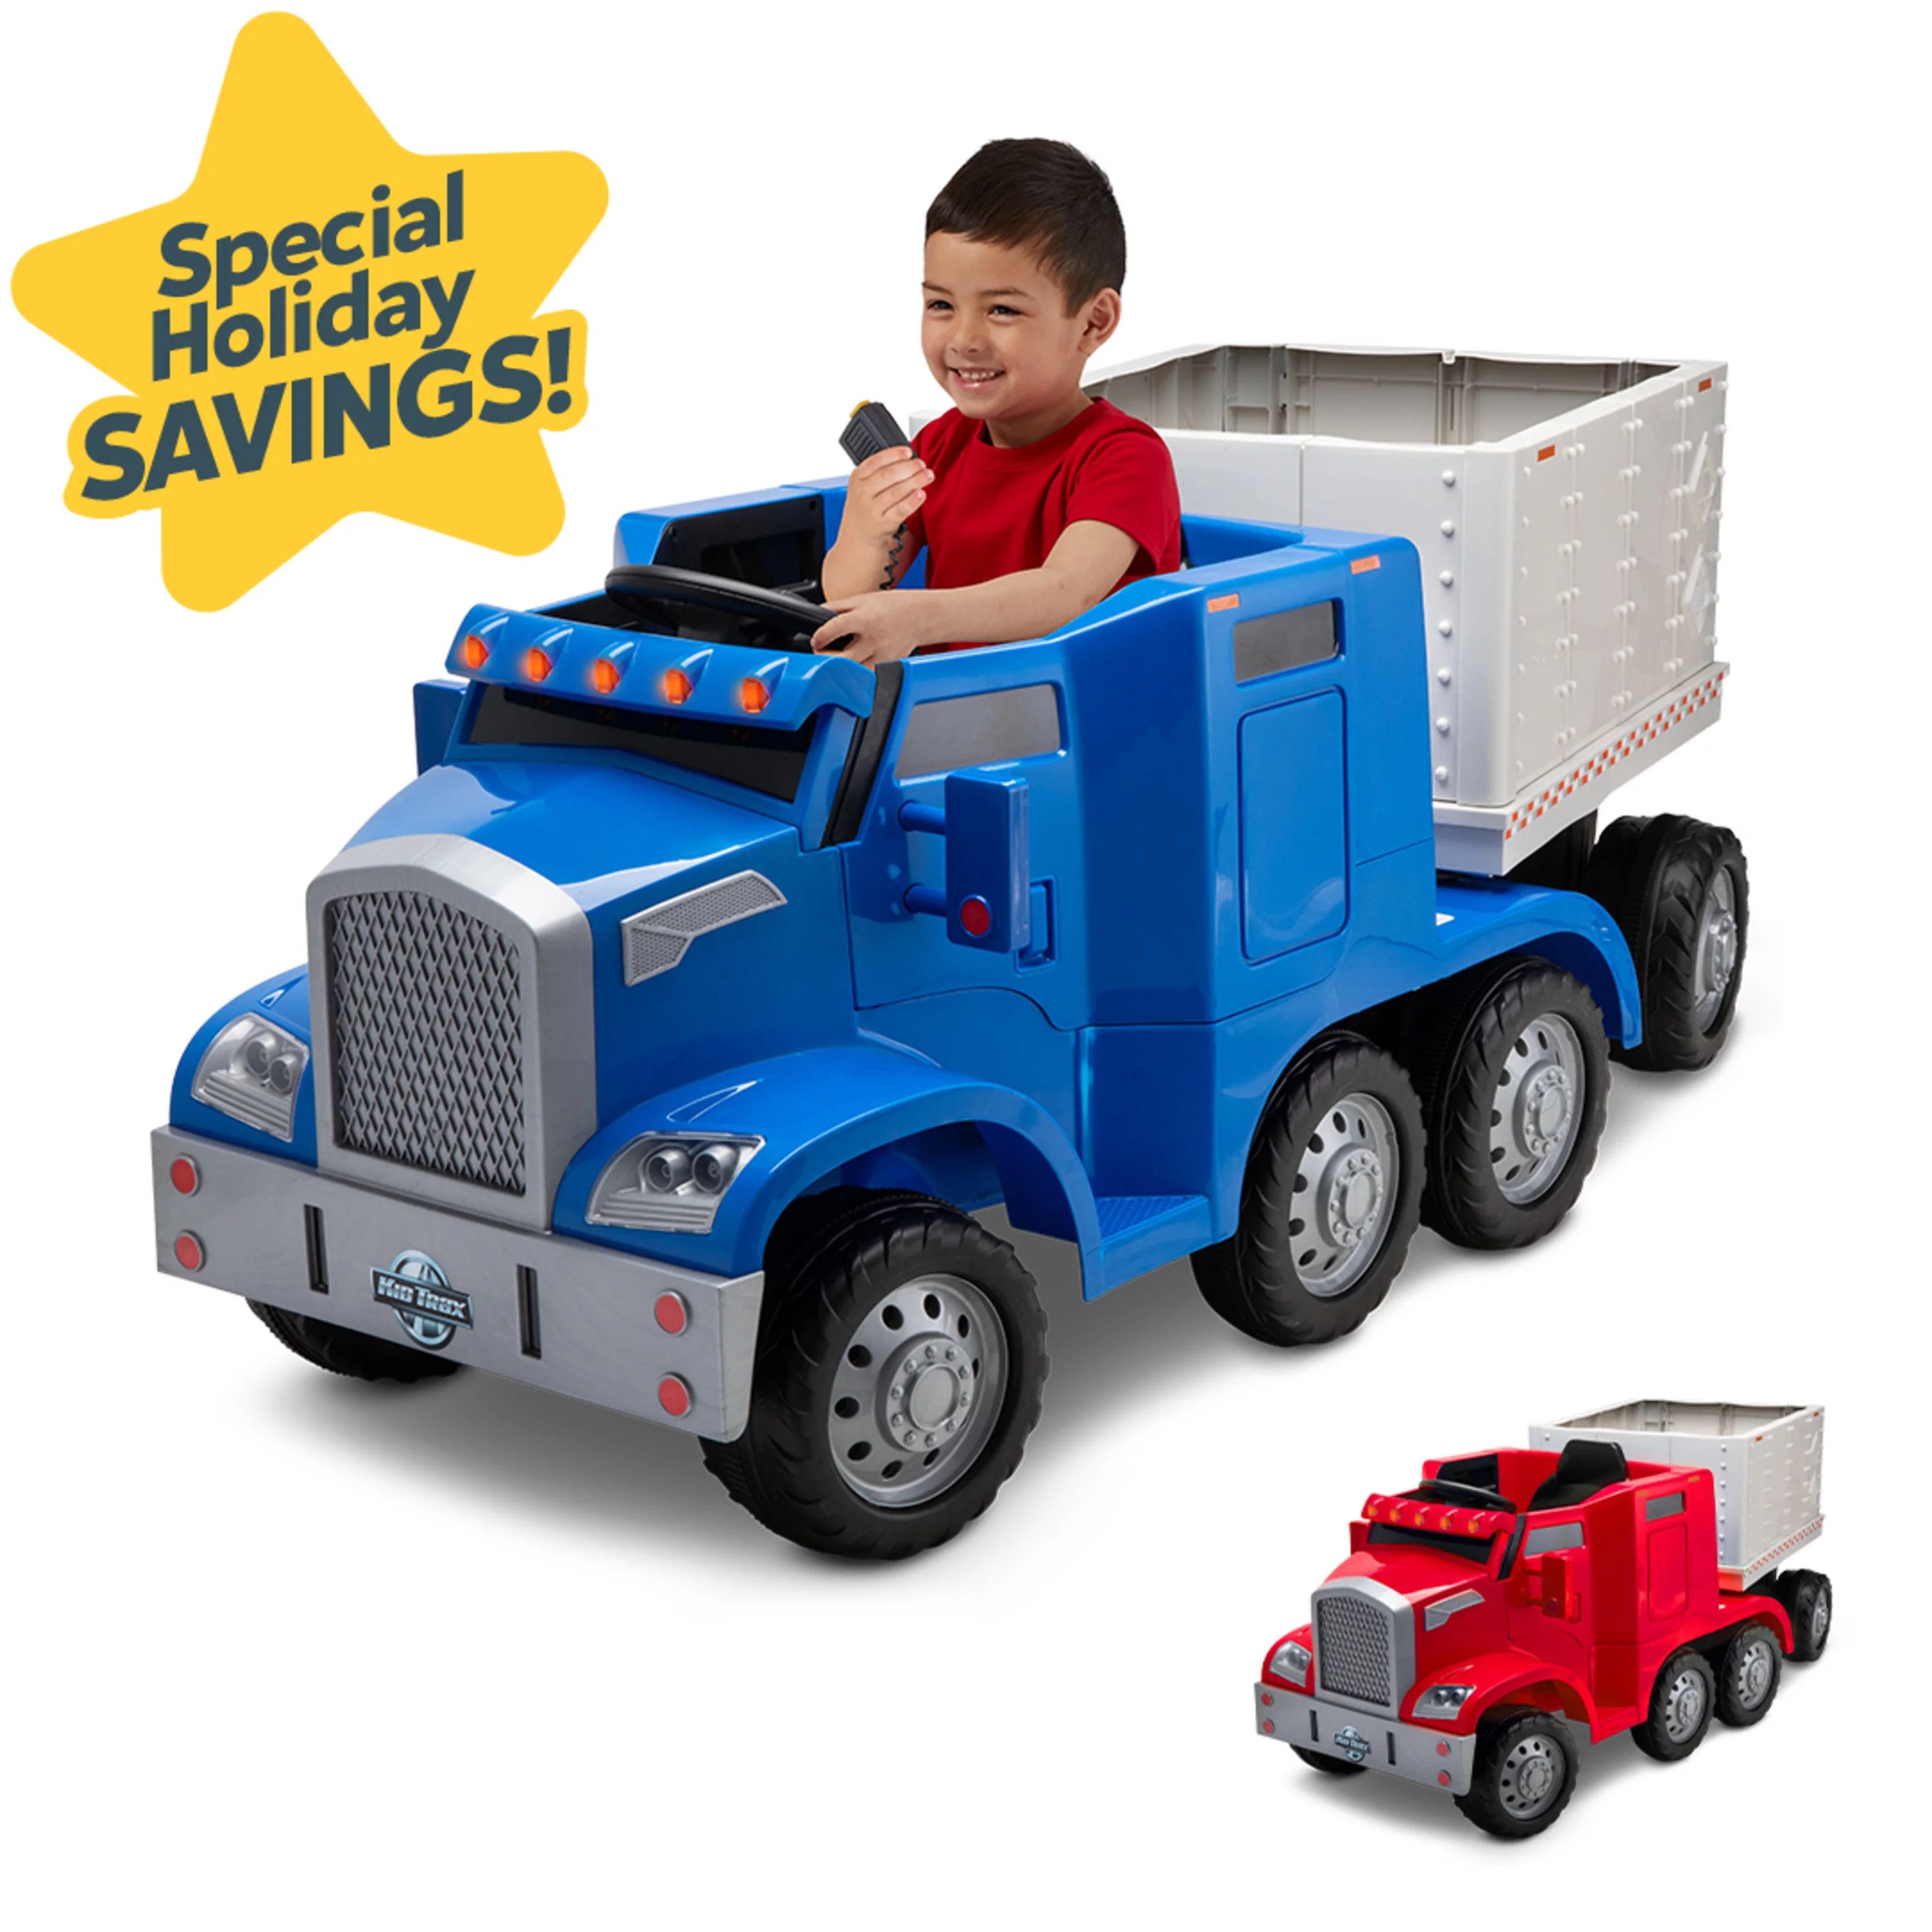 Semi-Truck and Trailer Ride-On Toy by Kid Trax, Blue | Walmart (US)